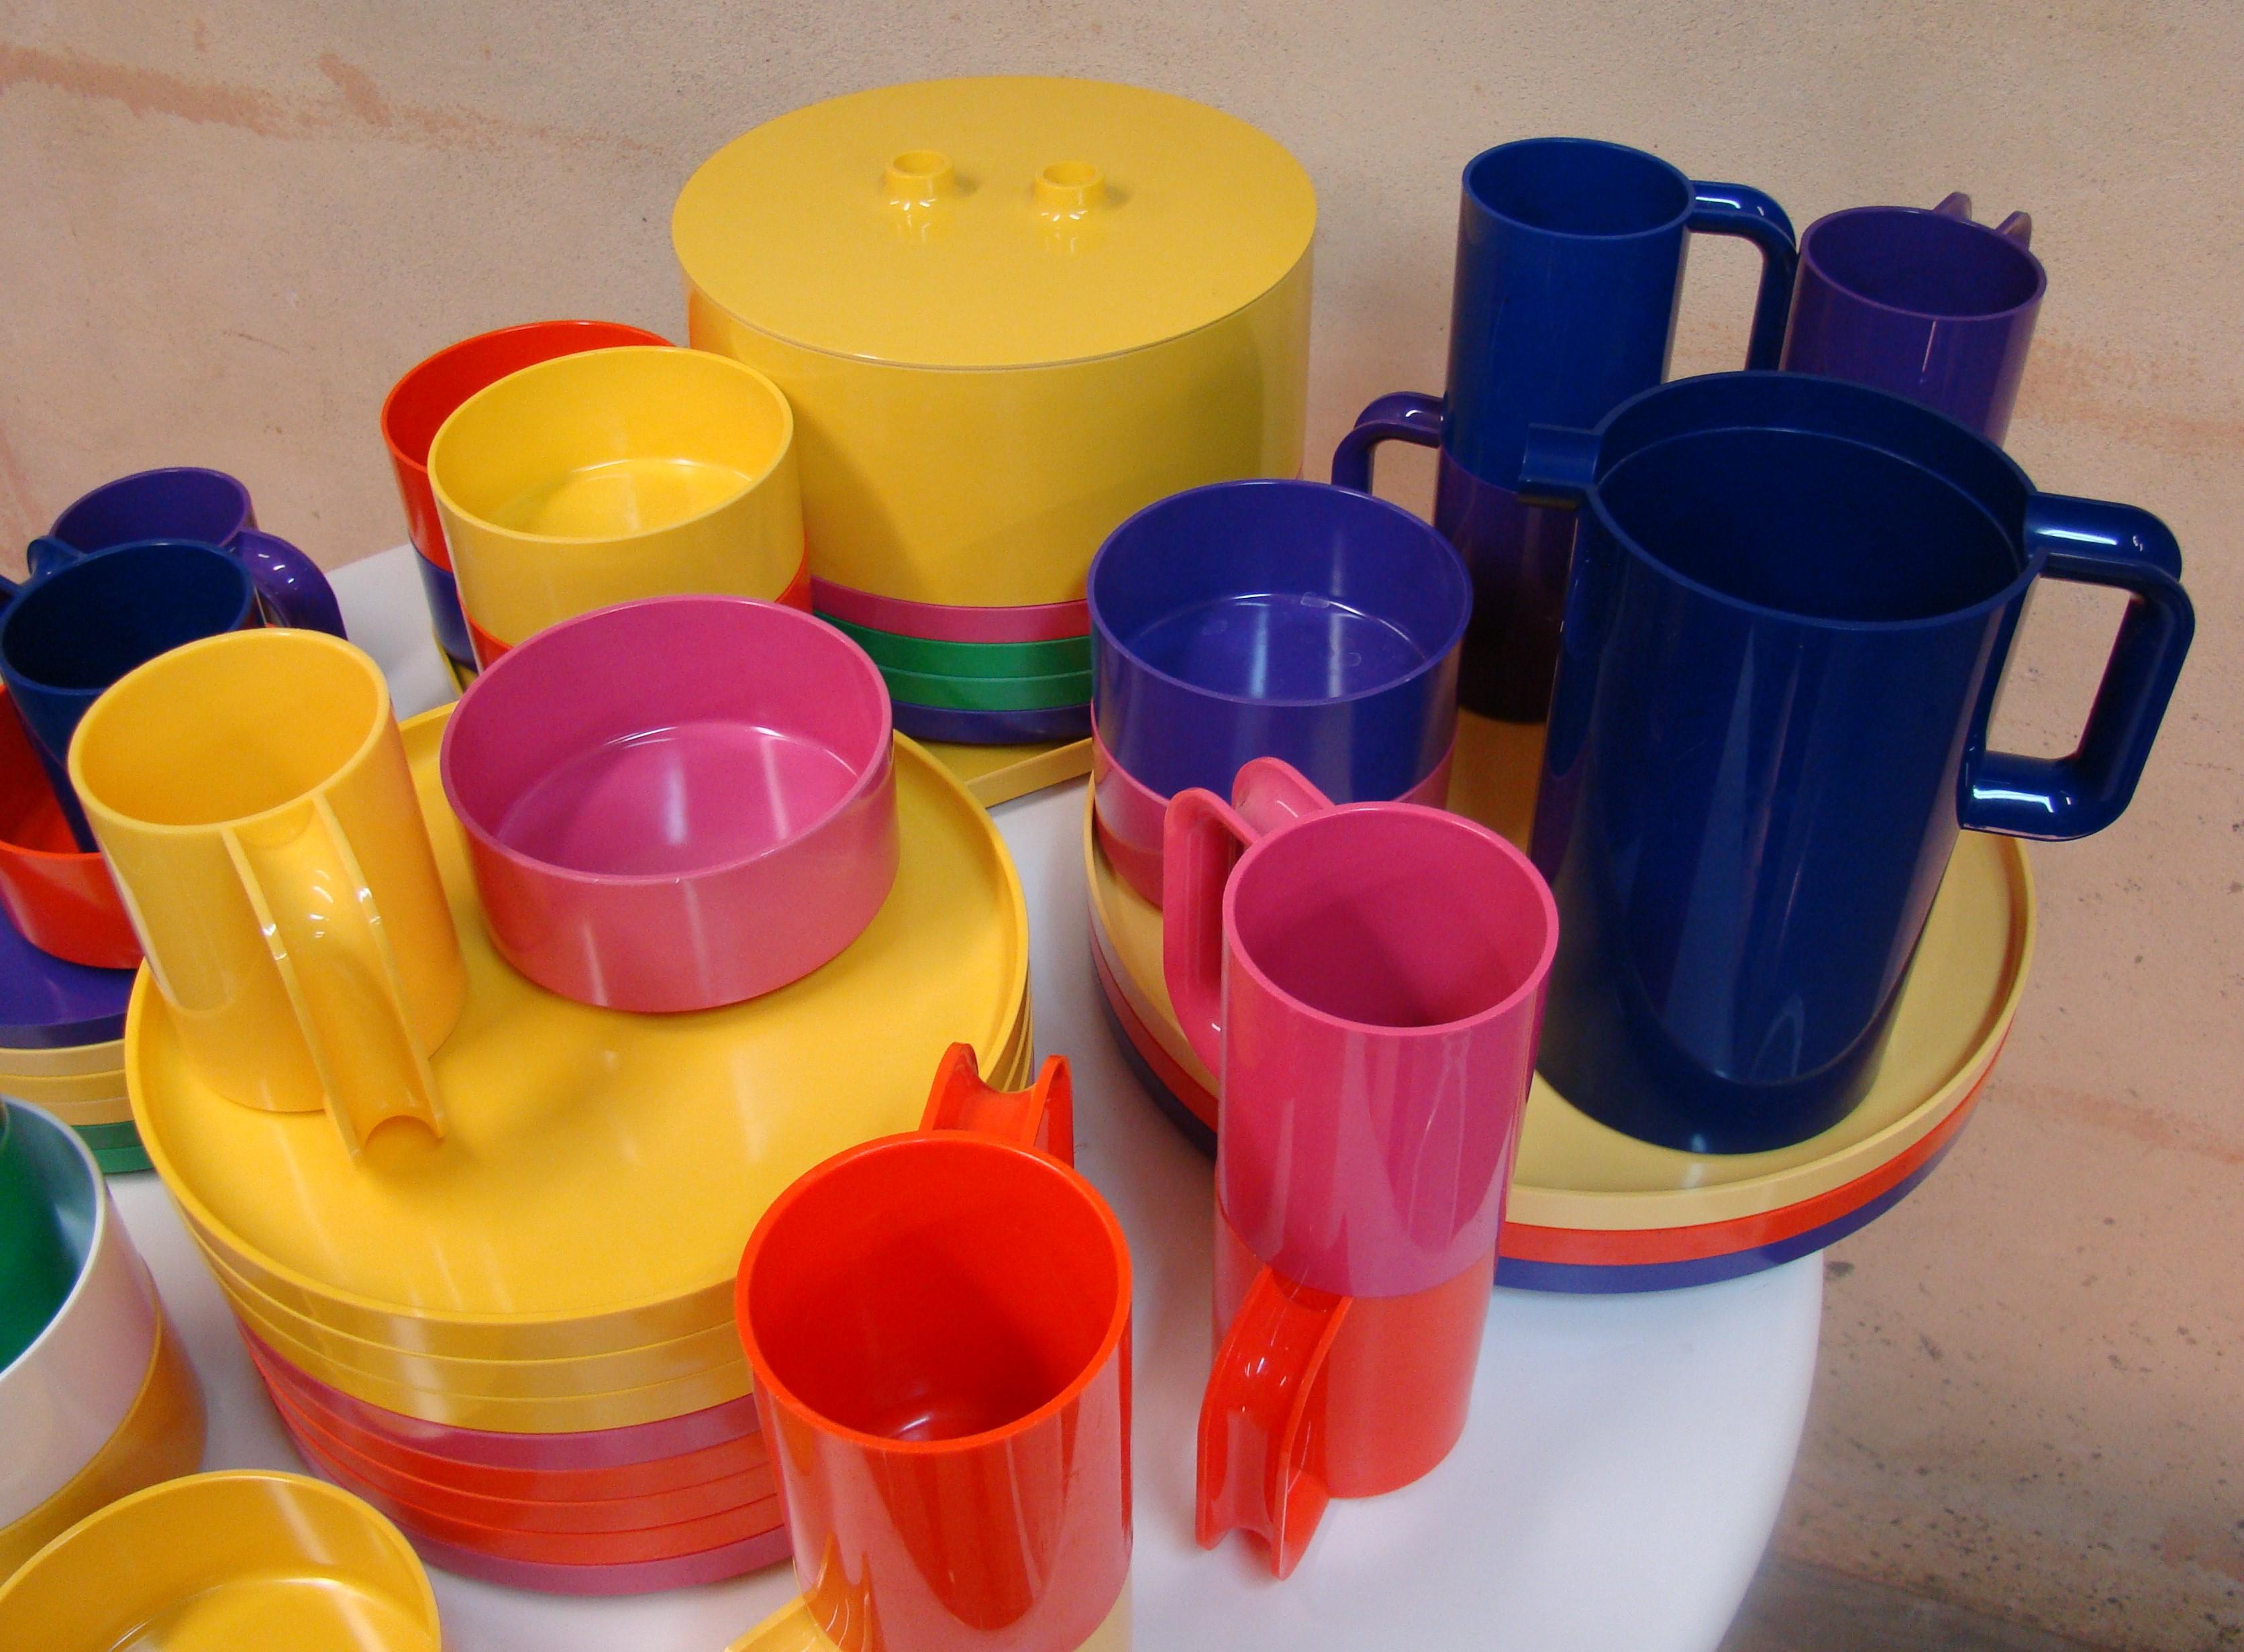 Plastic Colorful Assortment of Dinnerware by Massimo Vignelli for Heller Design